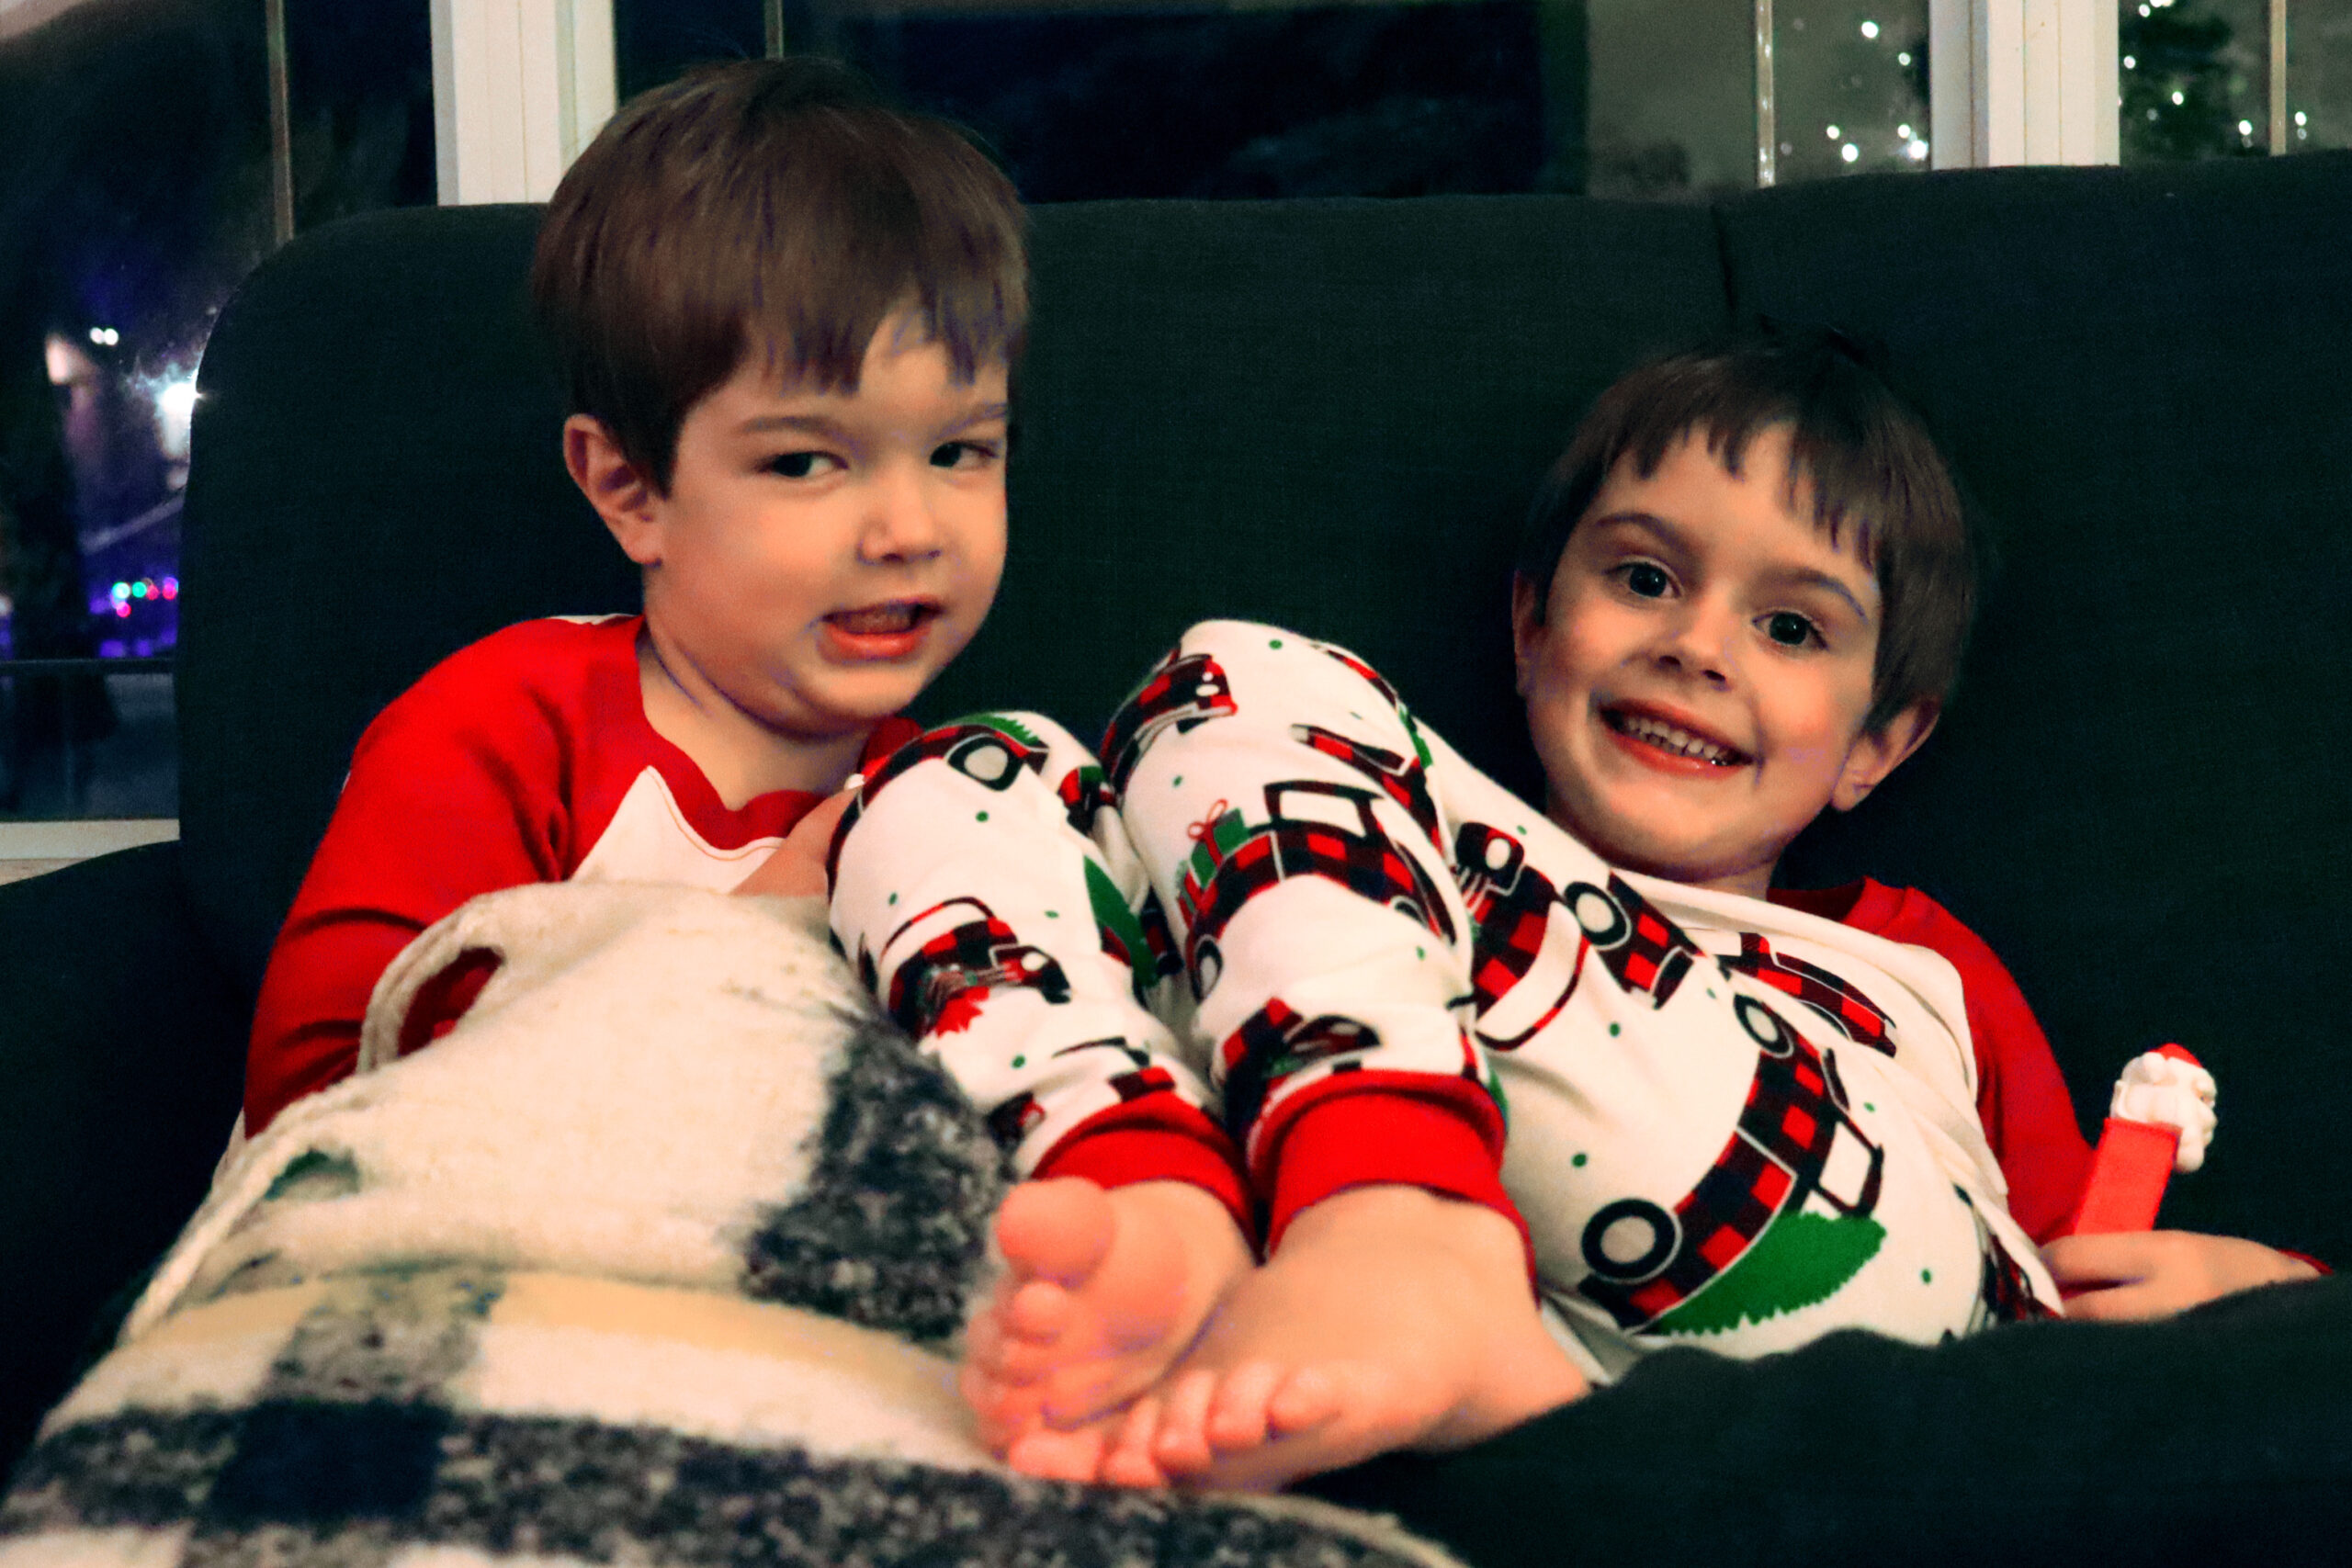 Two boys in Christmas pjs smile for the camera